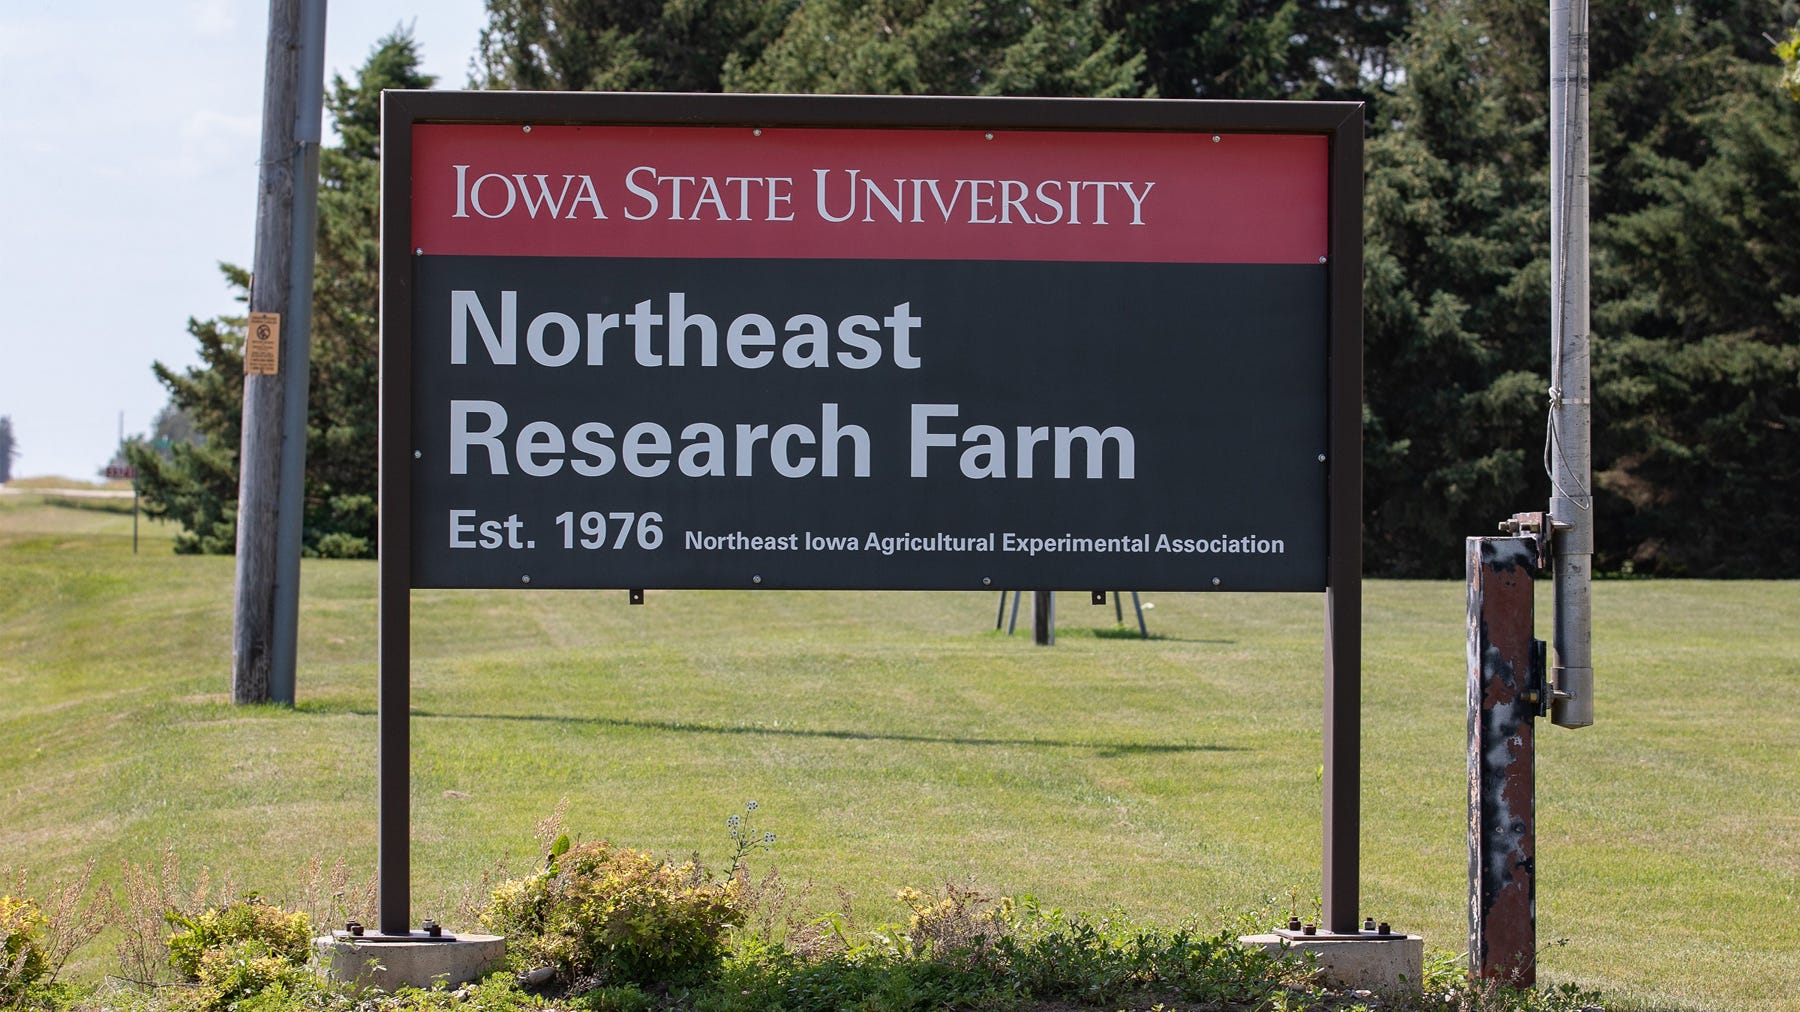 Northeast Research Farm sign at Iowa State University